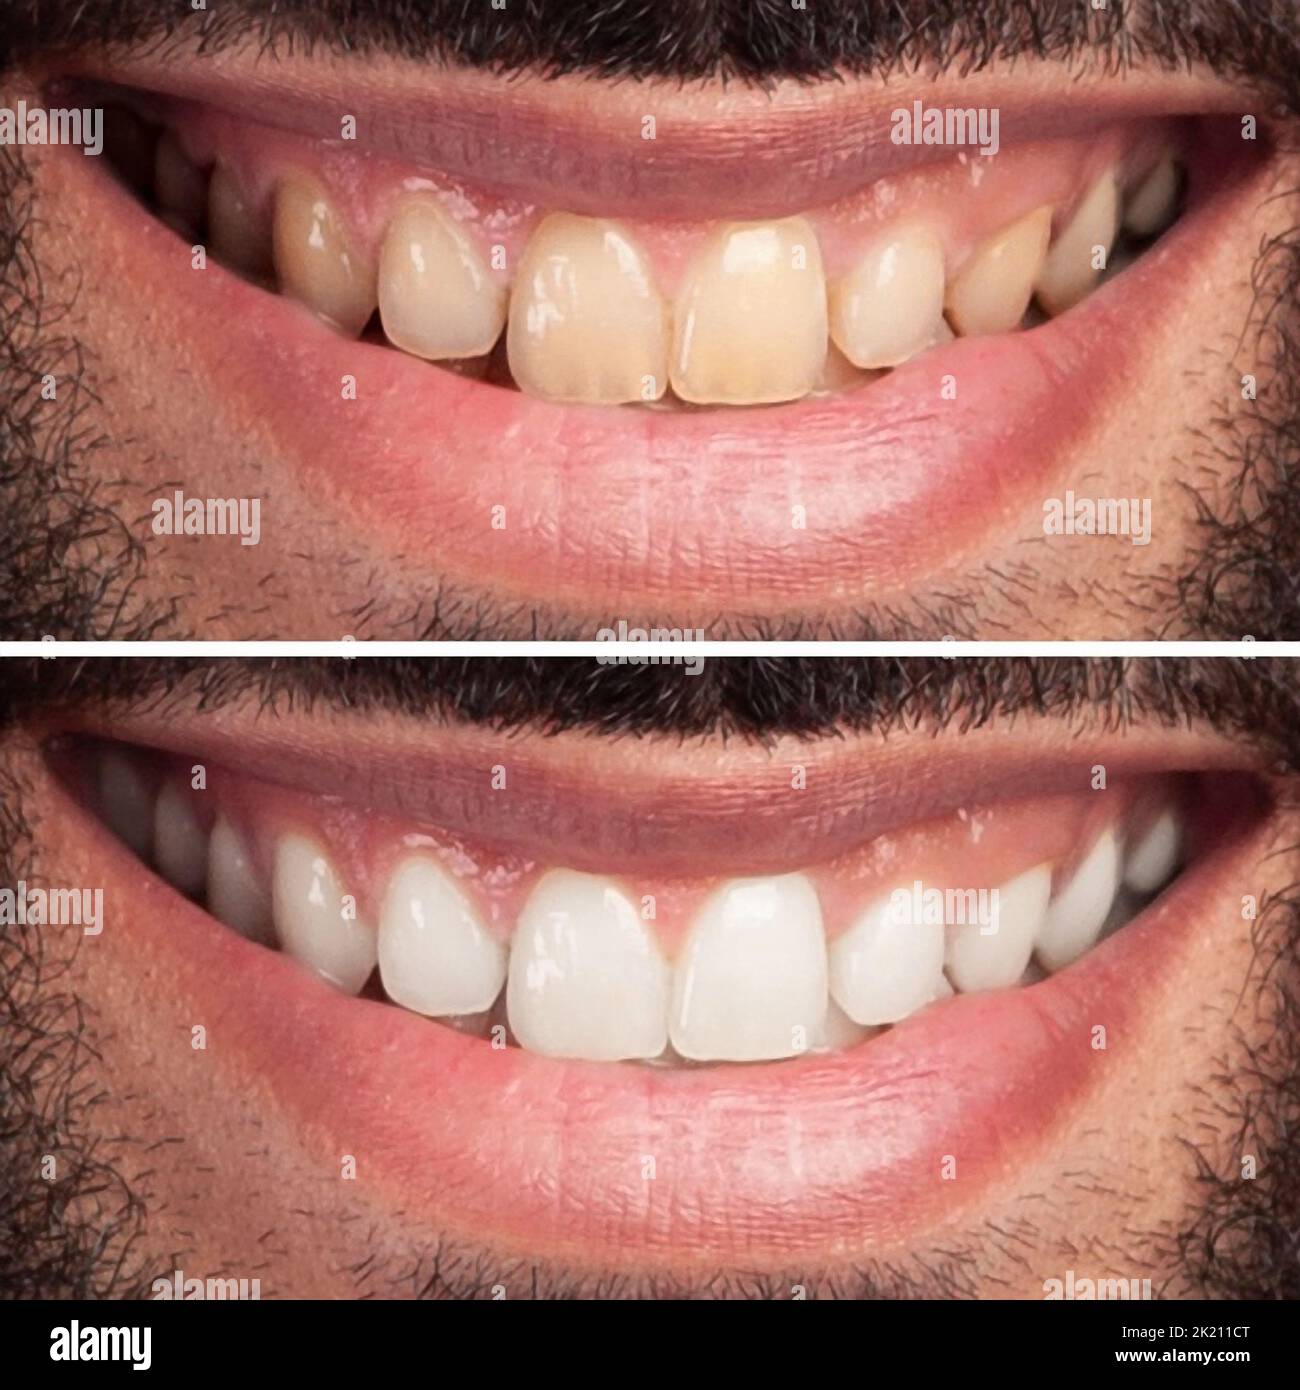 Closeup of man teeth before and after whitening or bleaching of smiling man. Dental health Concept. Oral Care concept Stock Photo